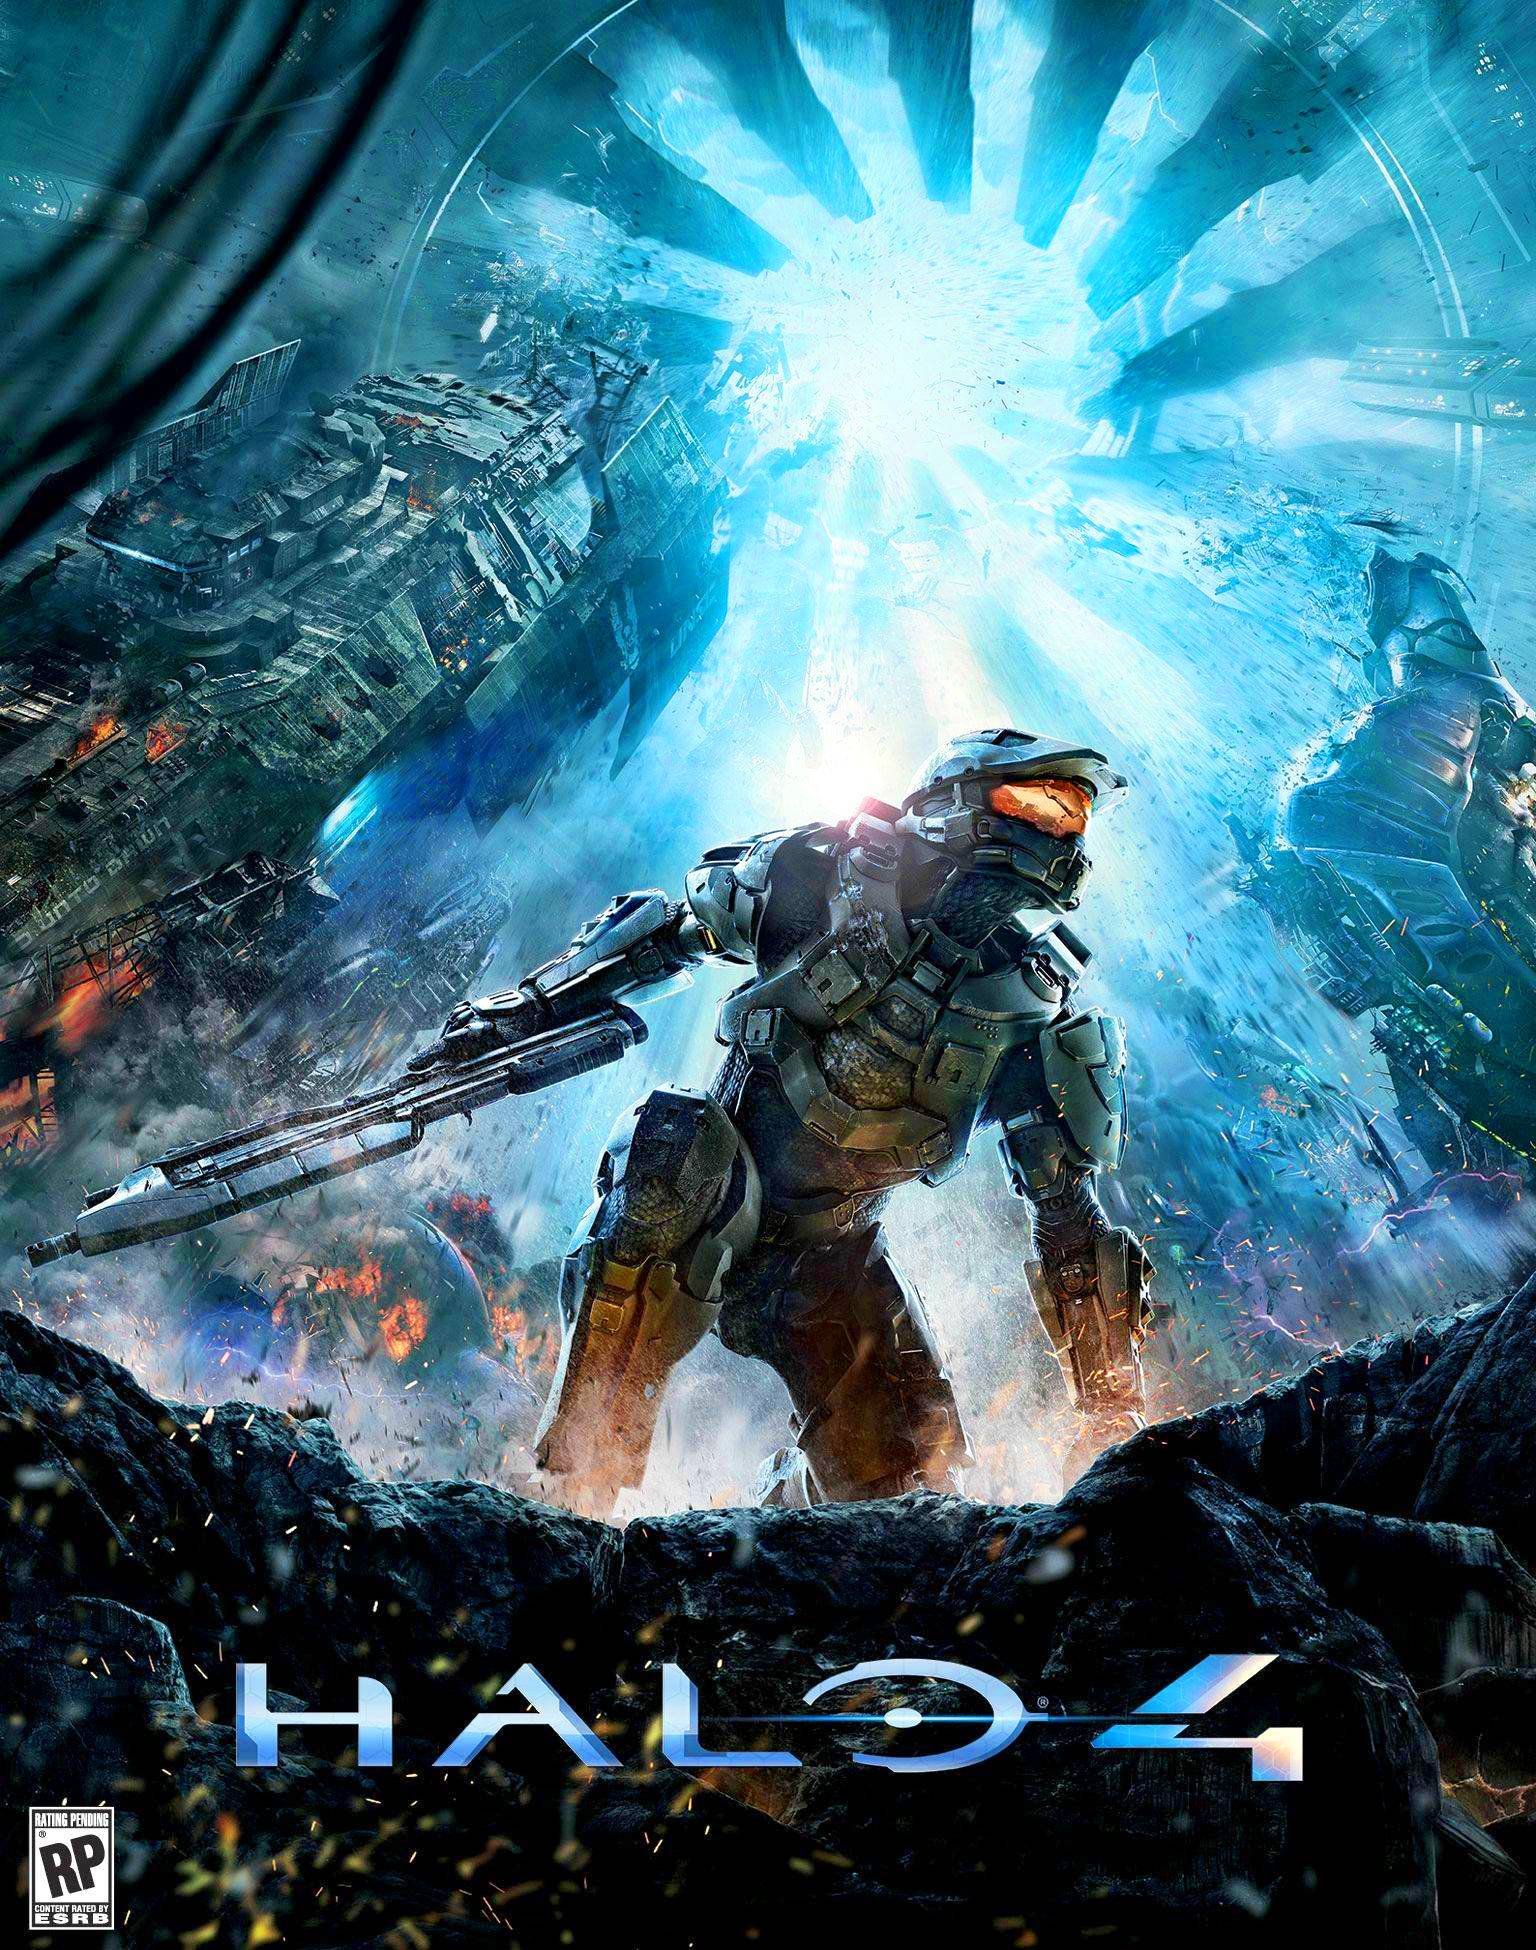 343 Industries can be proud of Halo 4!